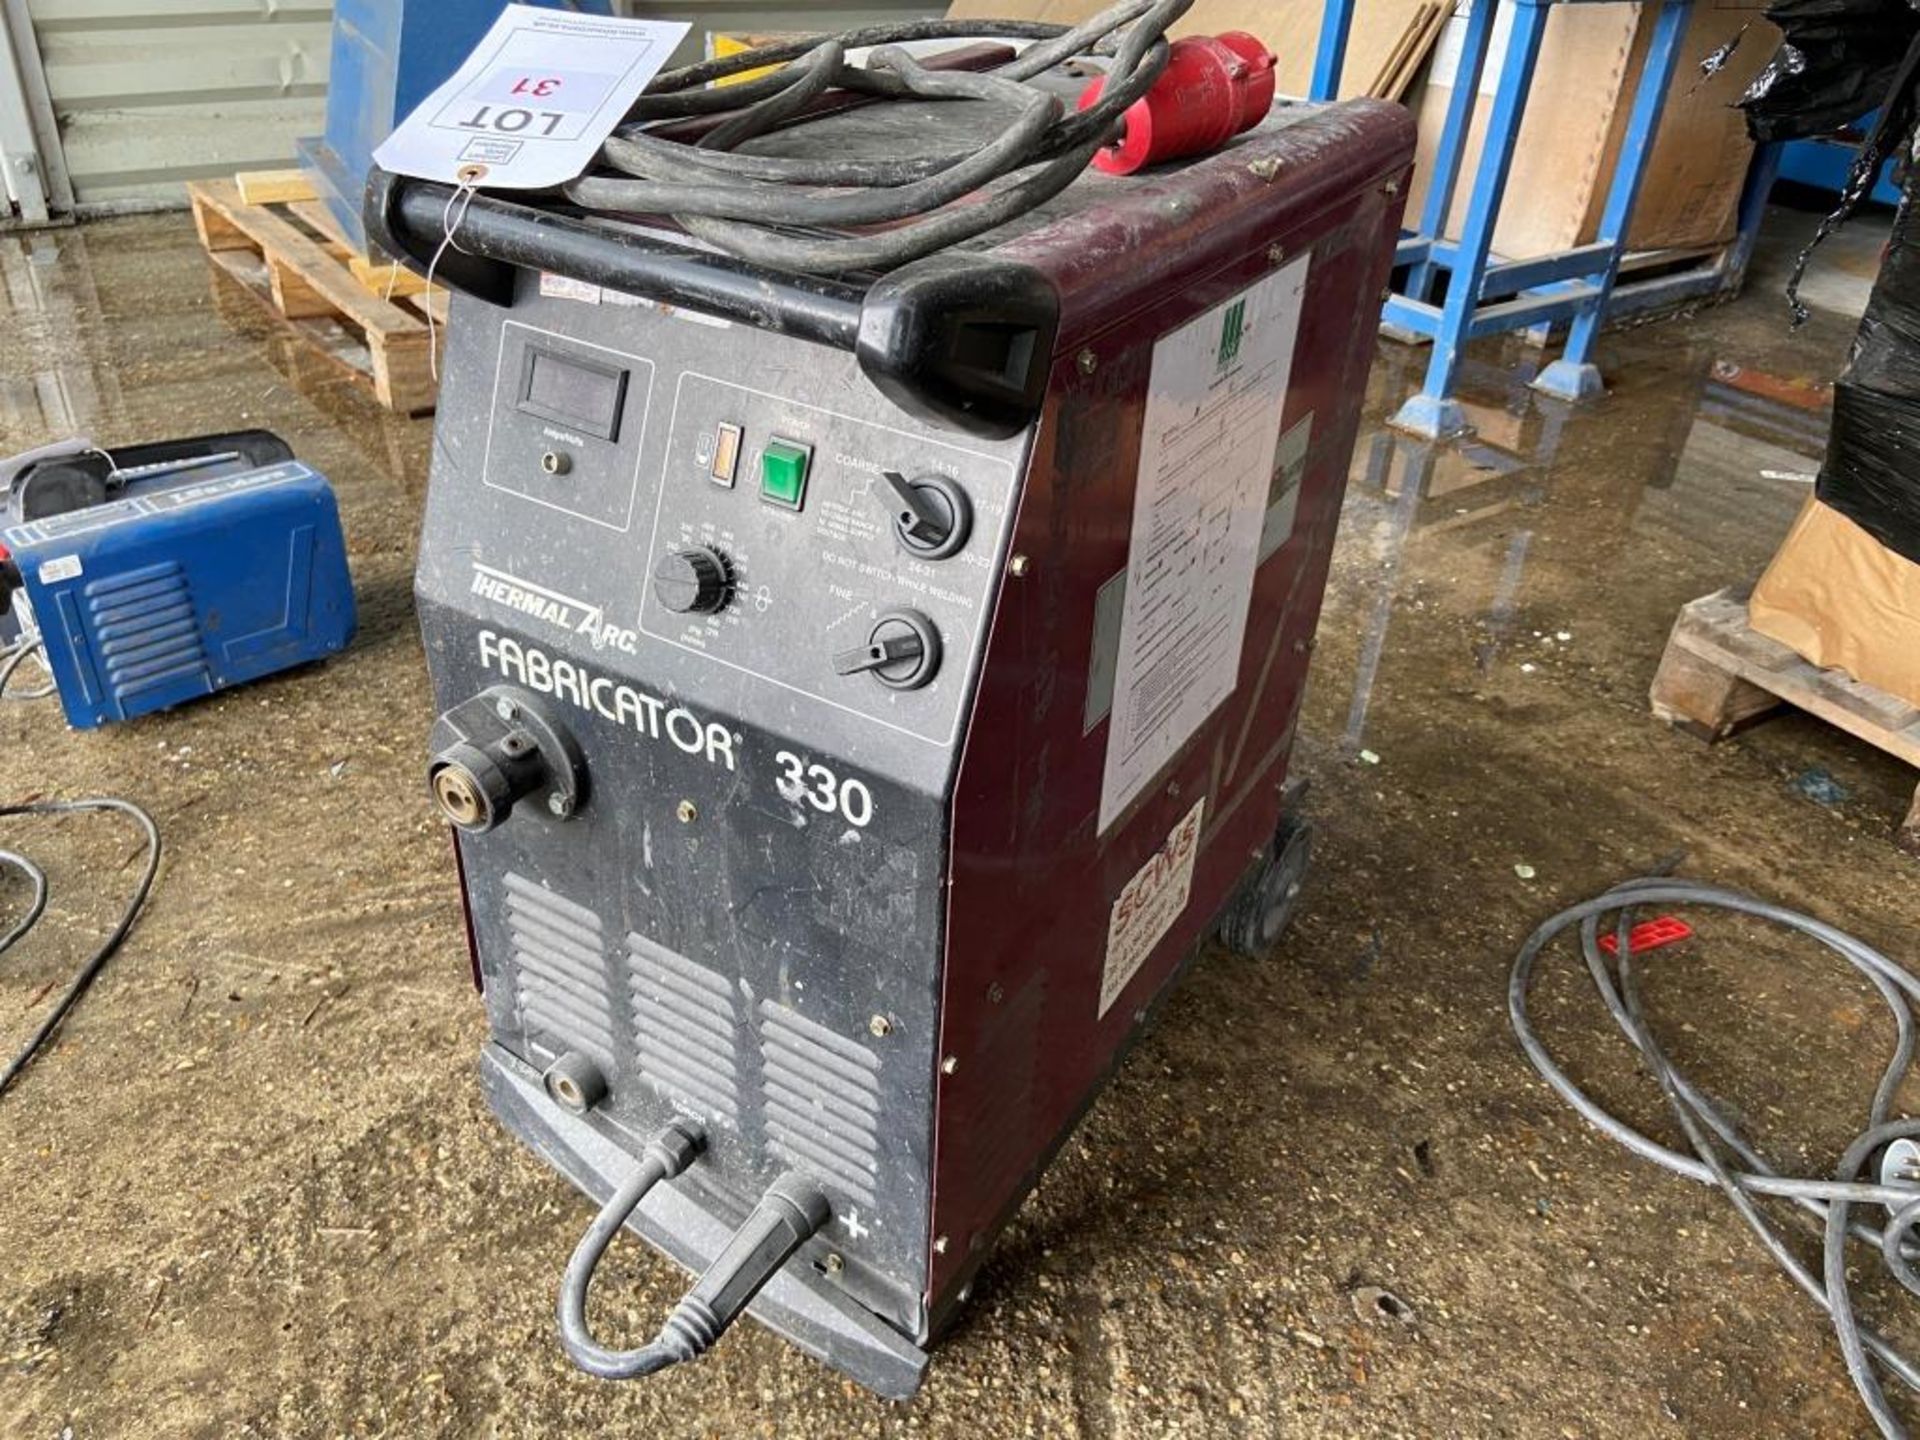 Thermal Arc Fabricator 330 mig welder s/n H324 010 A 706100C - Image 2 of 4